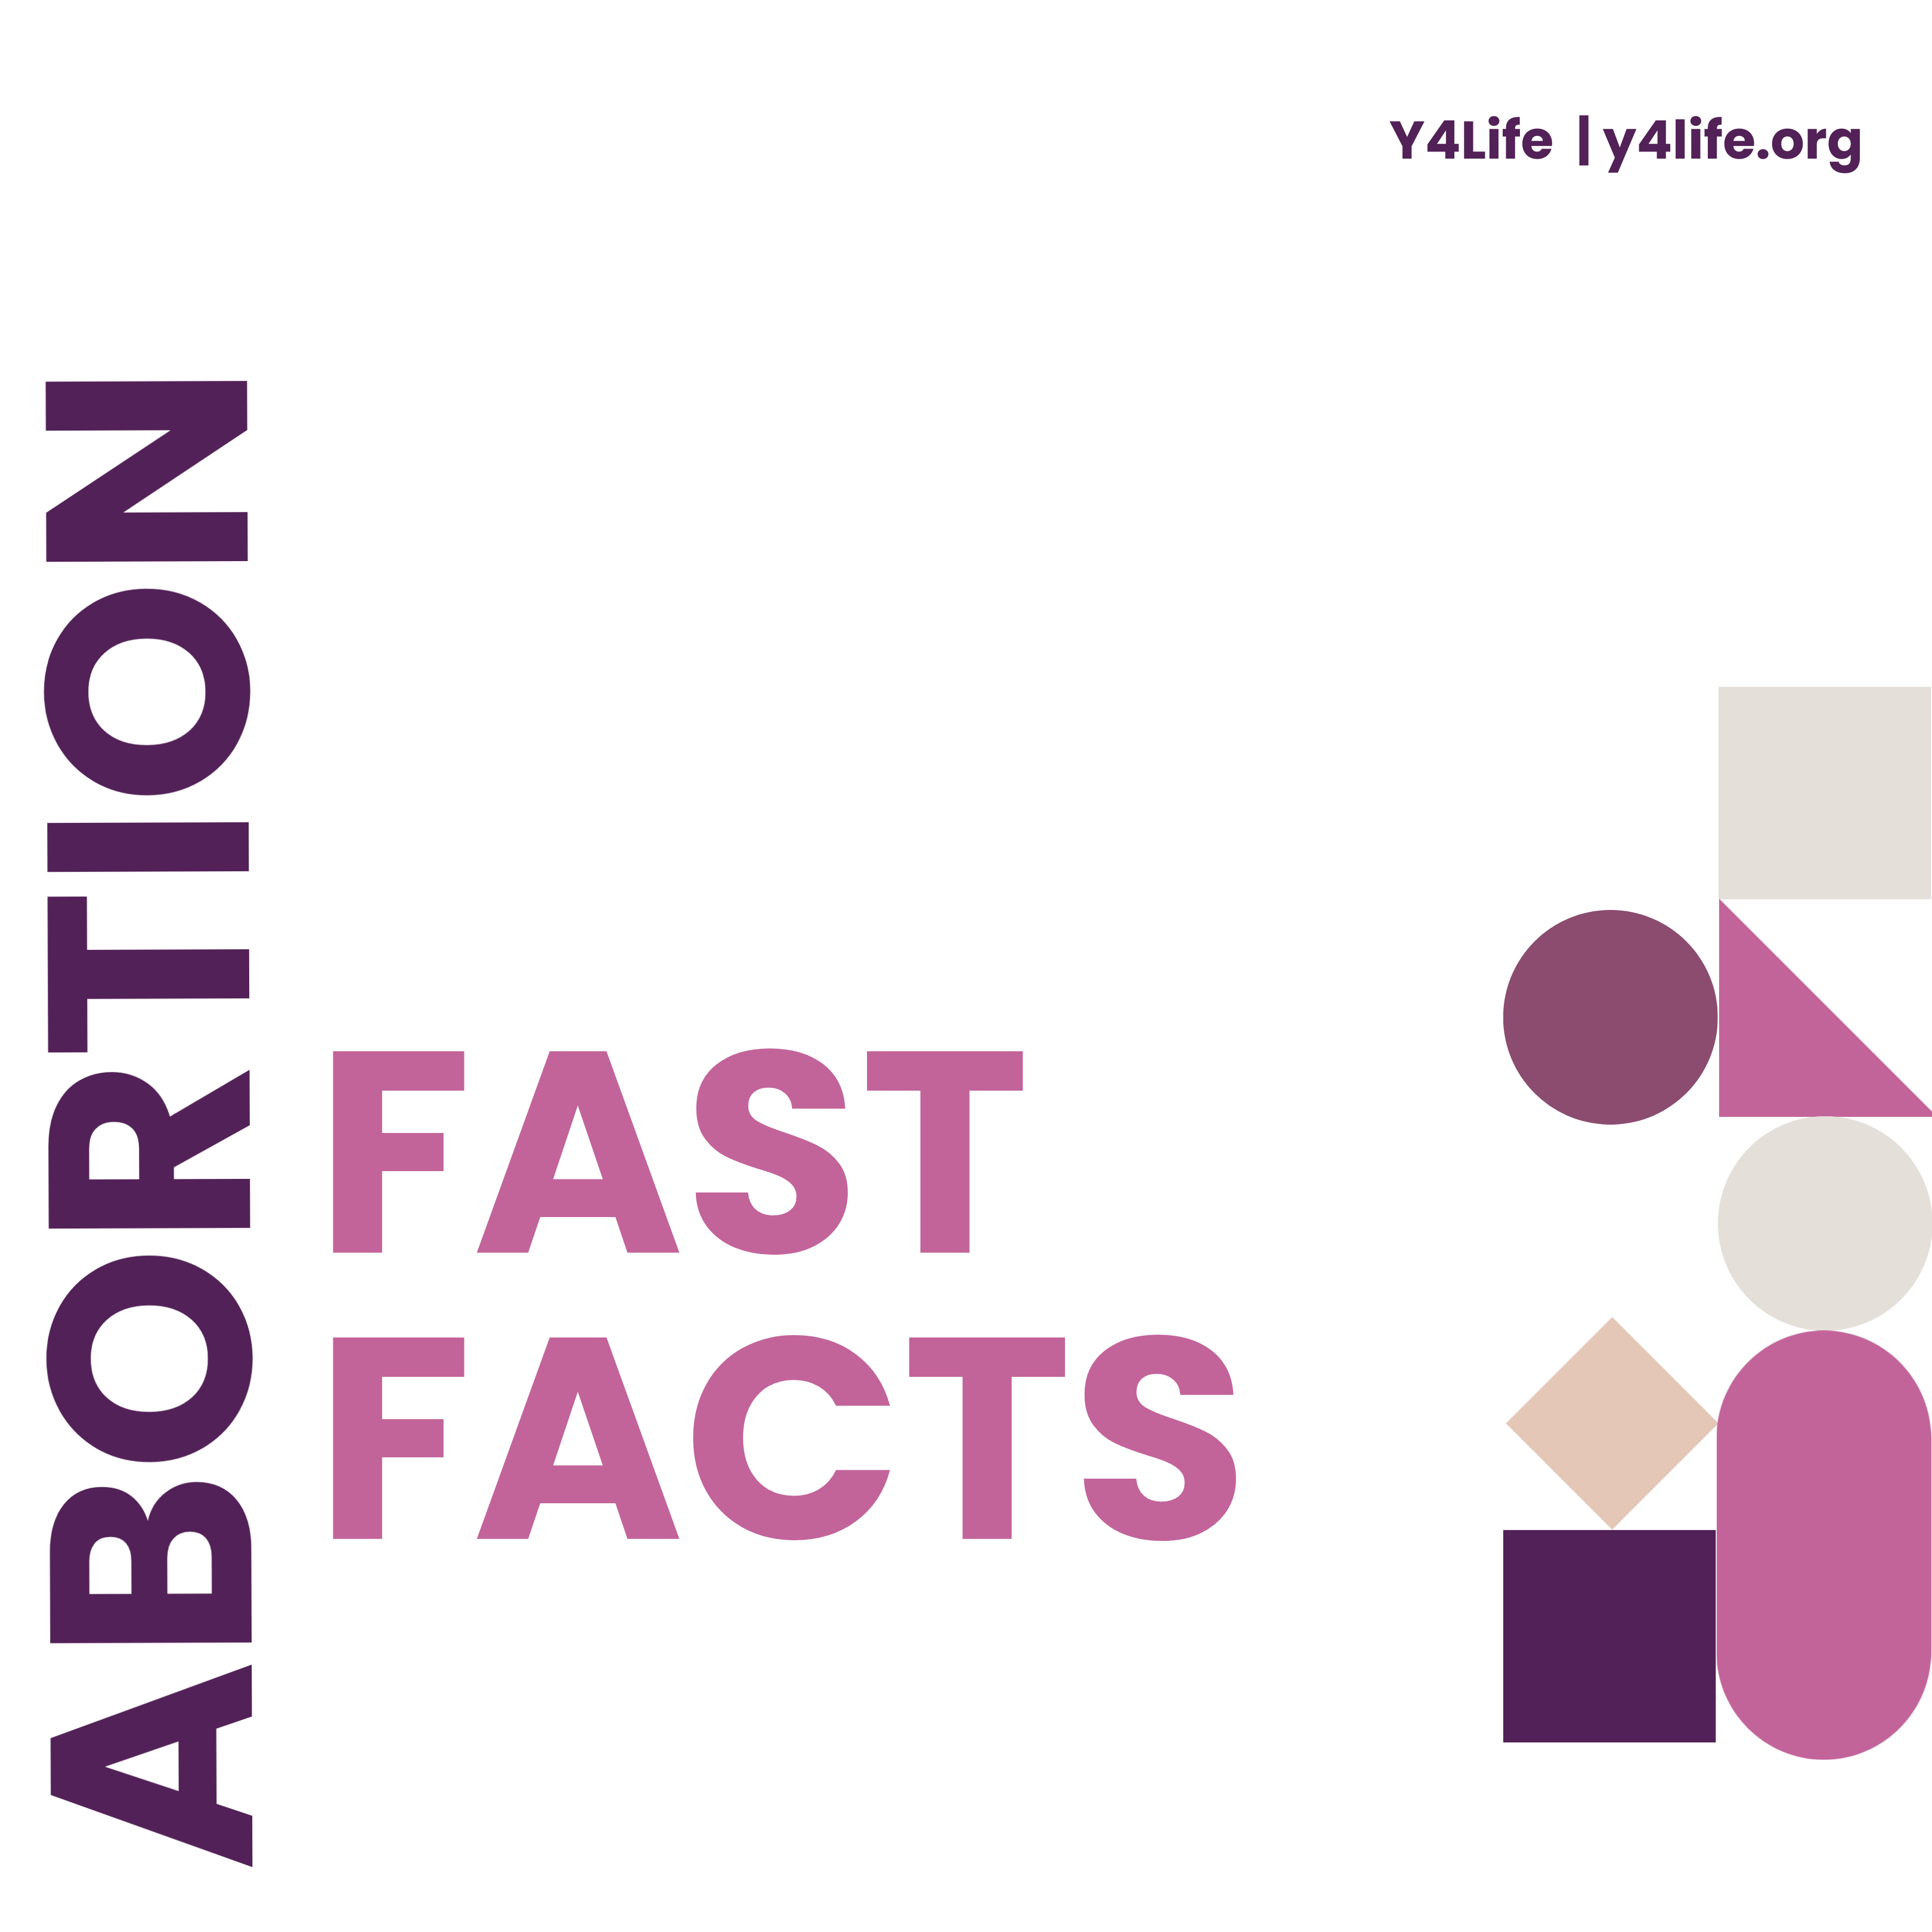 Abortion Fast Facts (fold-out brochure)